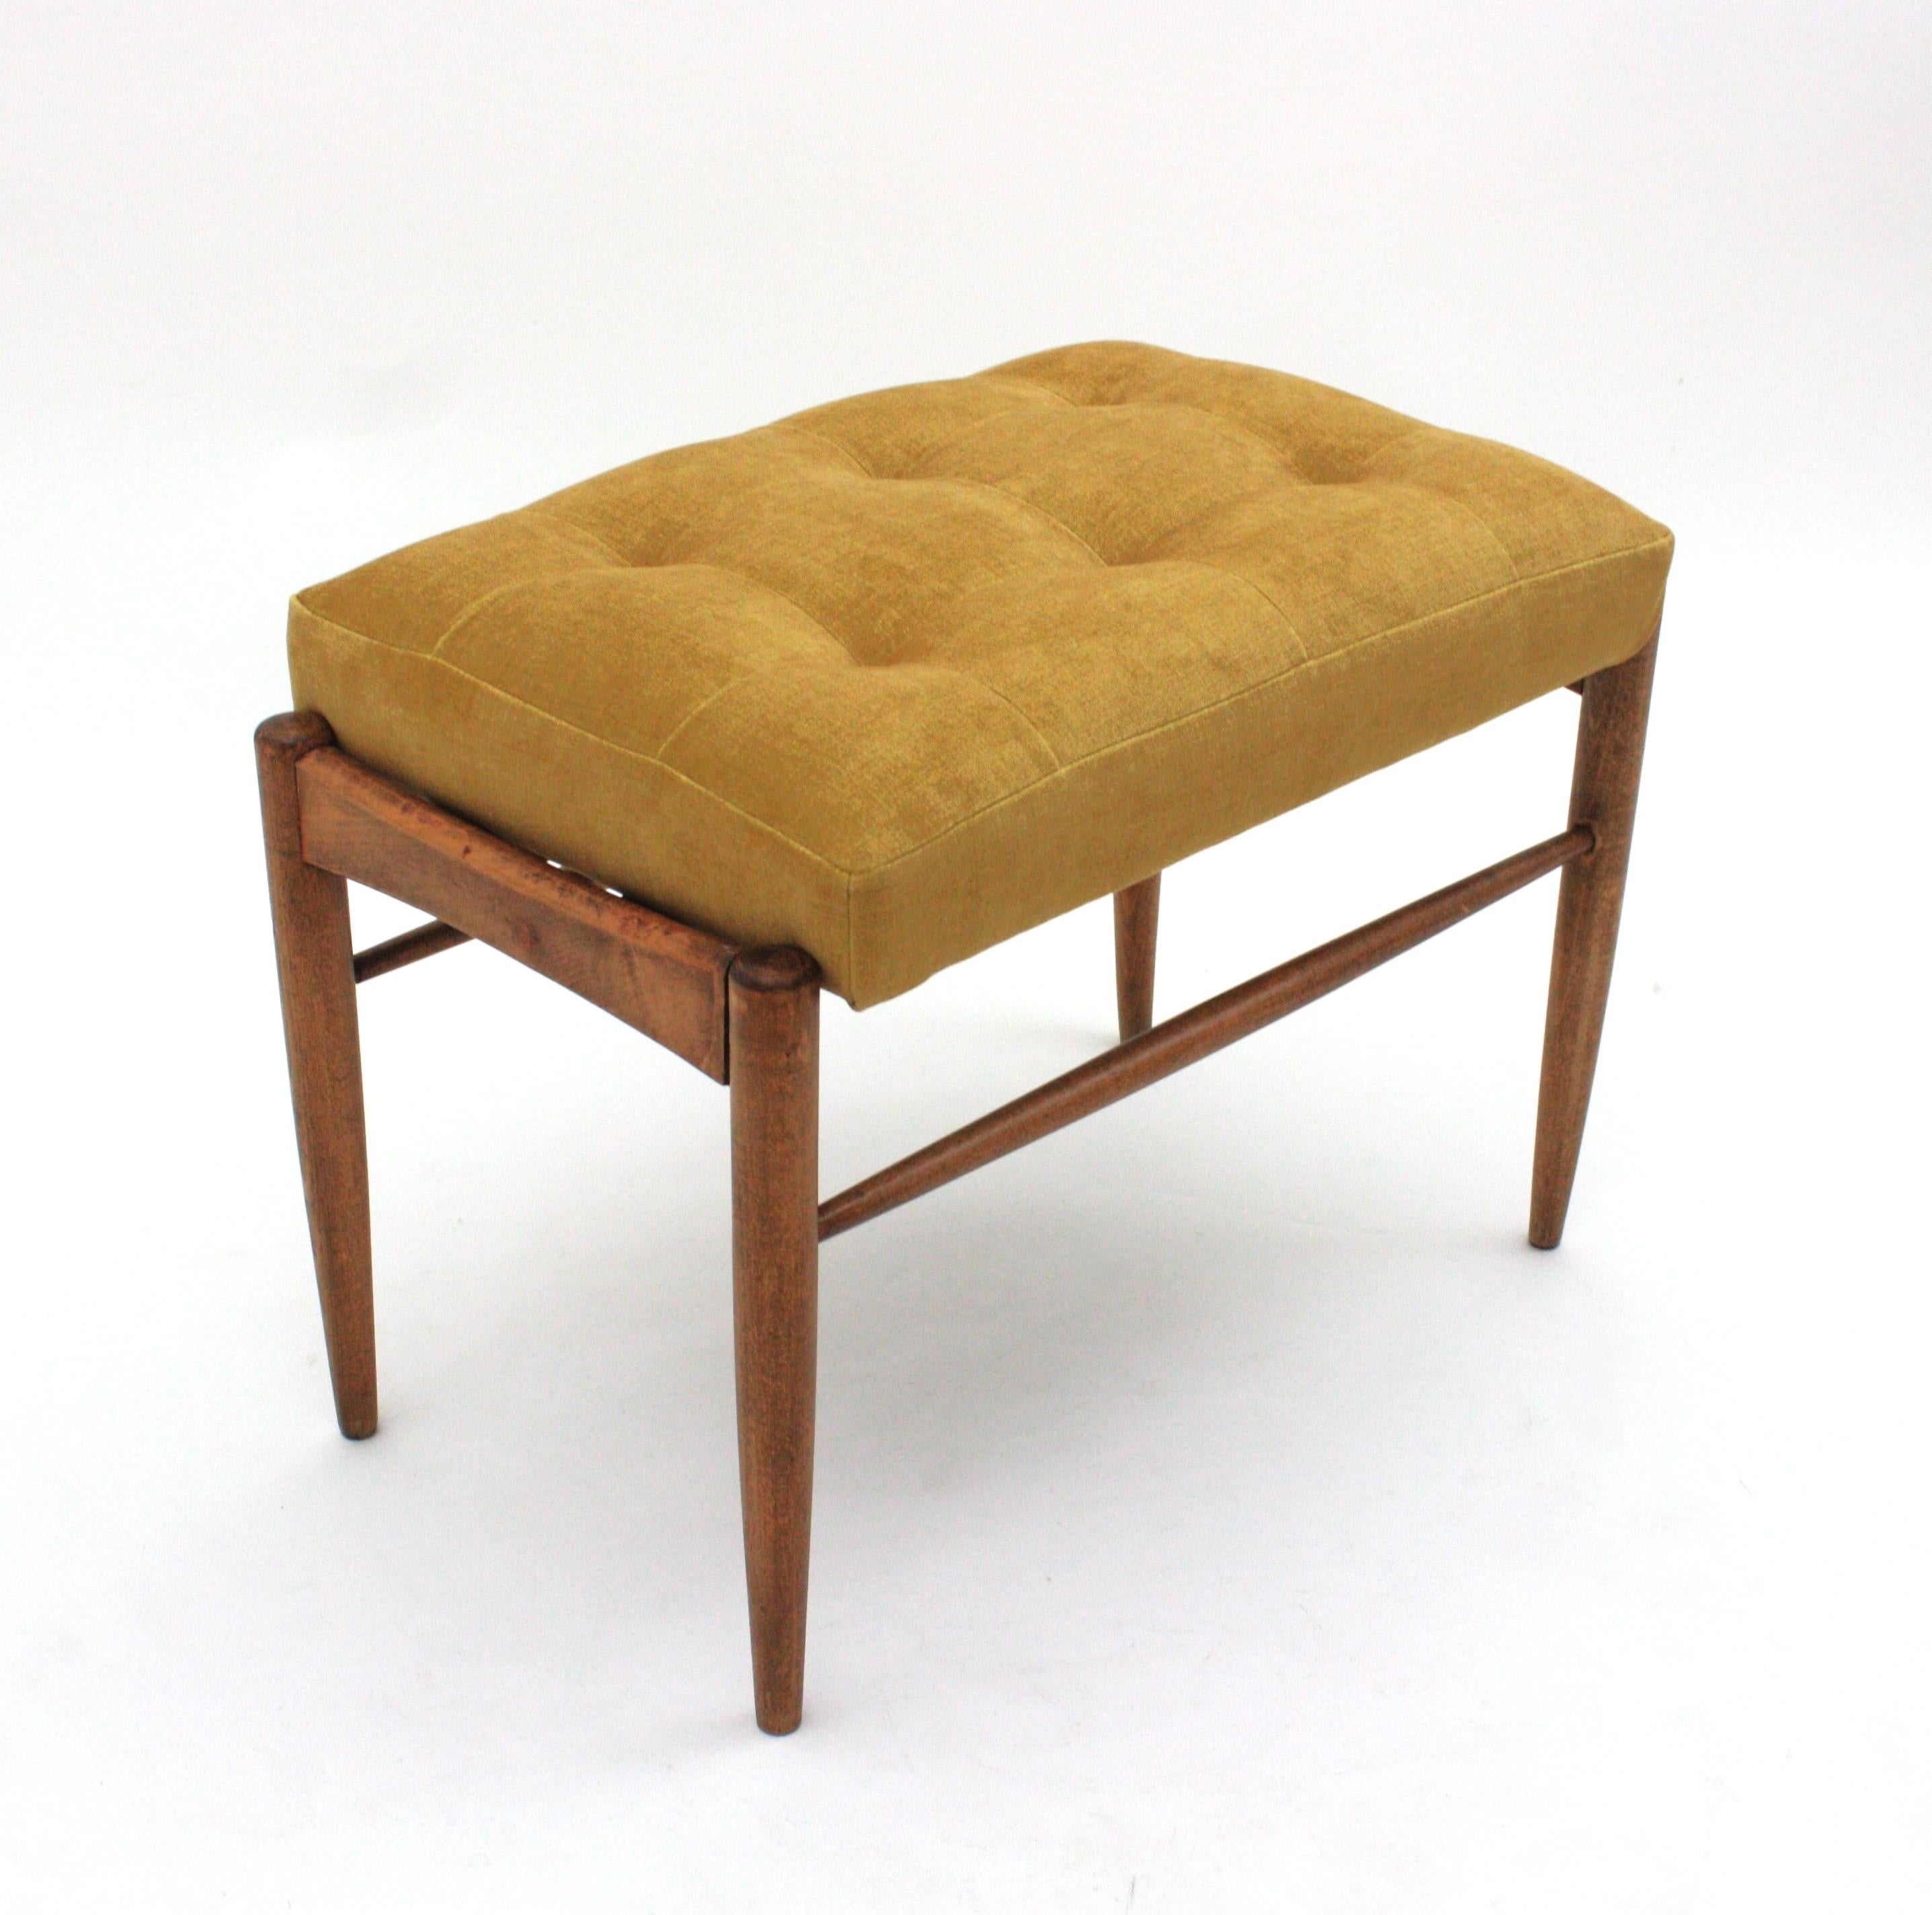 Scandinavian Modern Stool Ottoman or Bench New Upholstered in Yellow Chenille For Sale 5